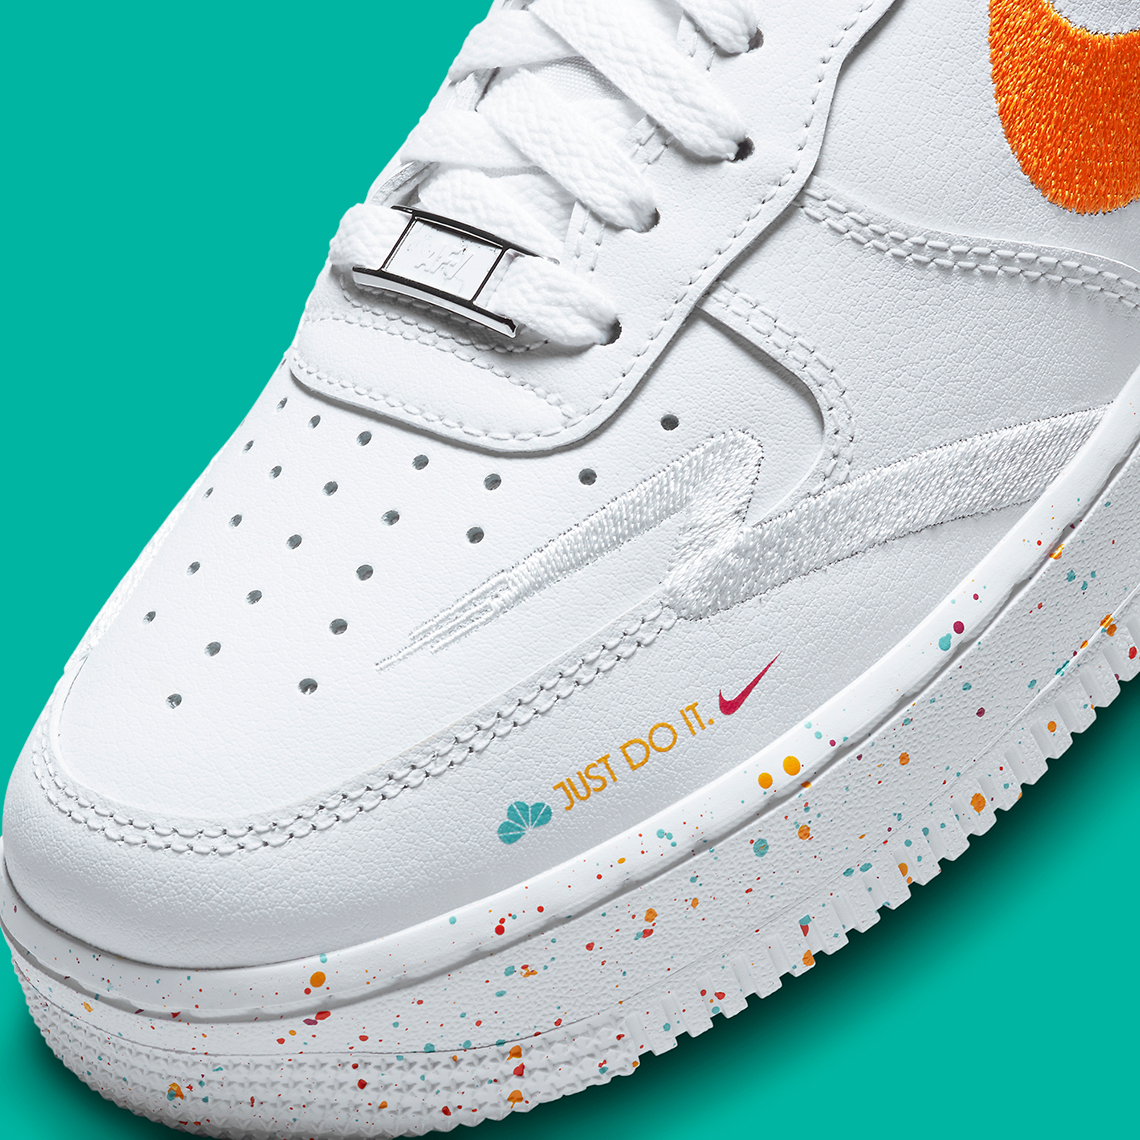 Lauren Halsey Teams Up With Nike for New Air Force 1 Design –